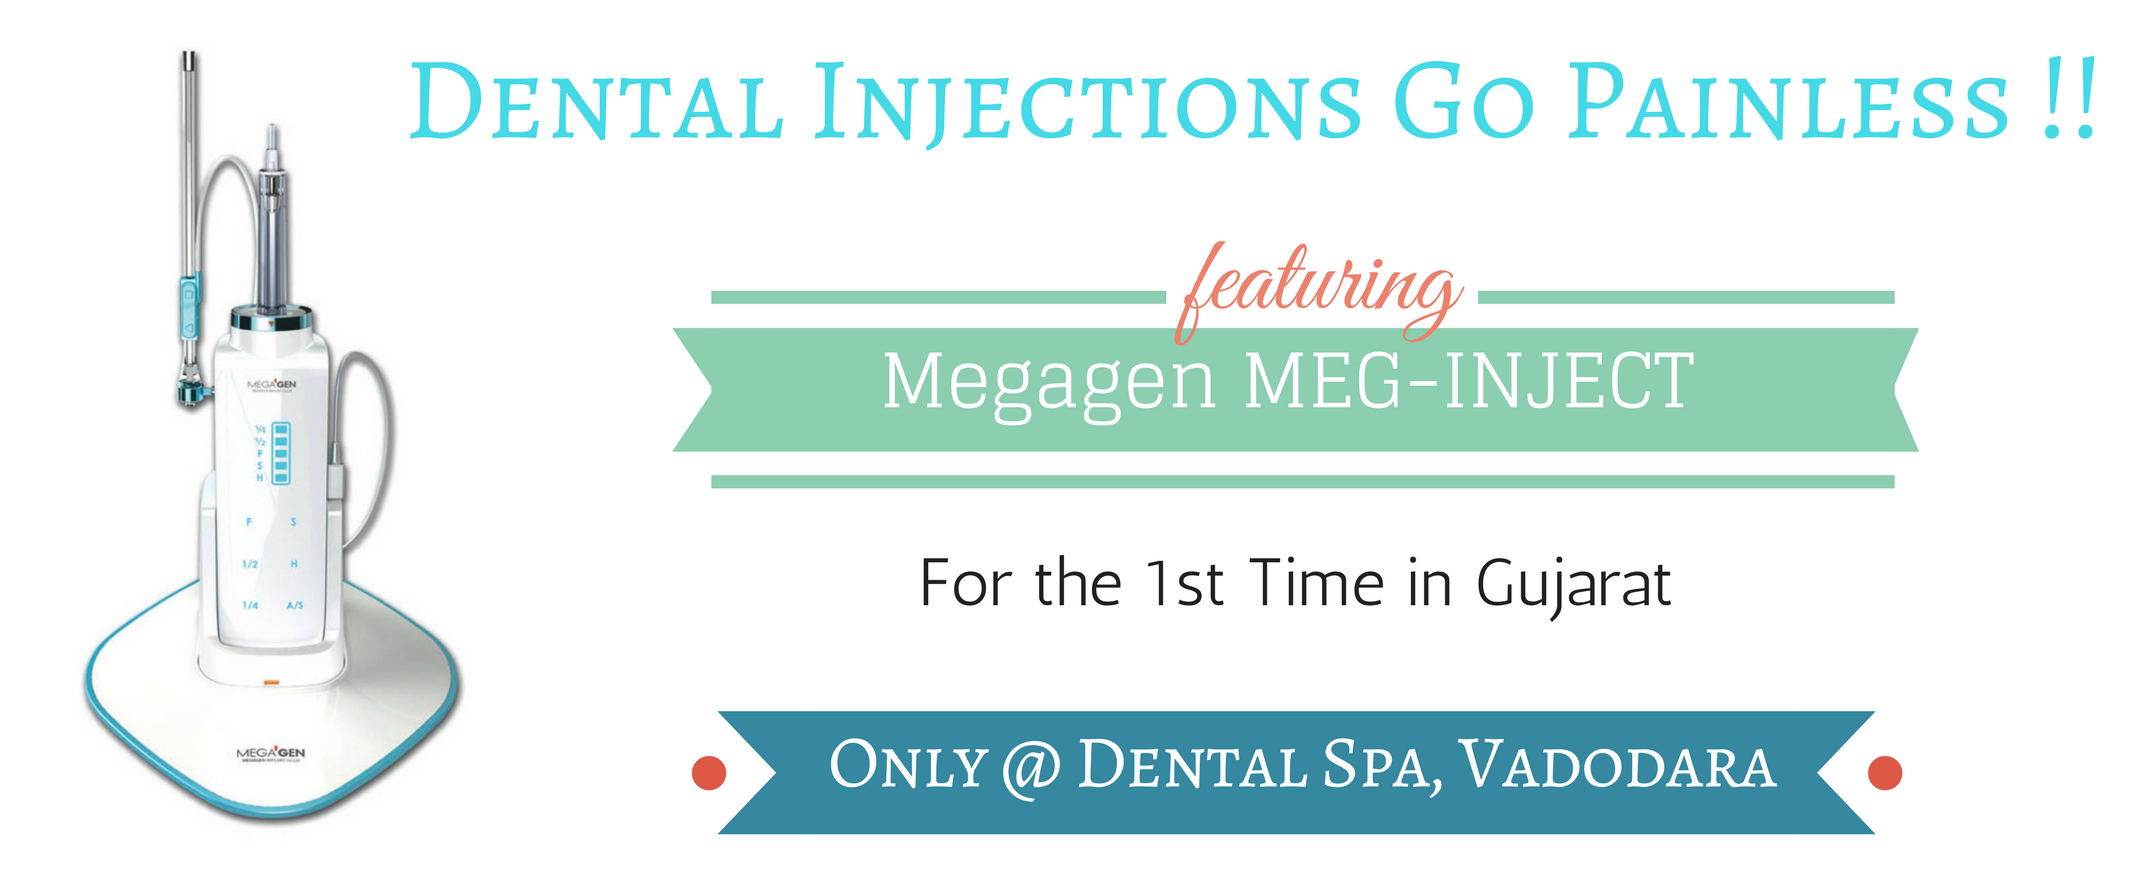 Dental Injections Go Painless !!